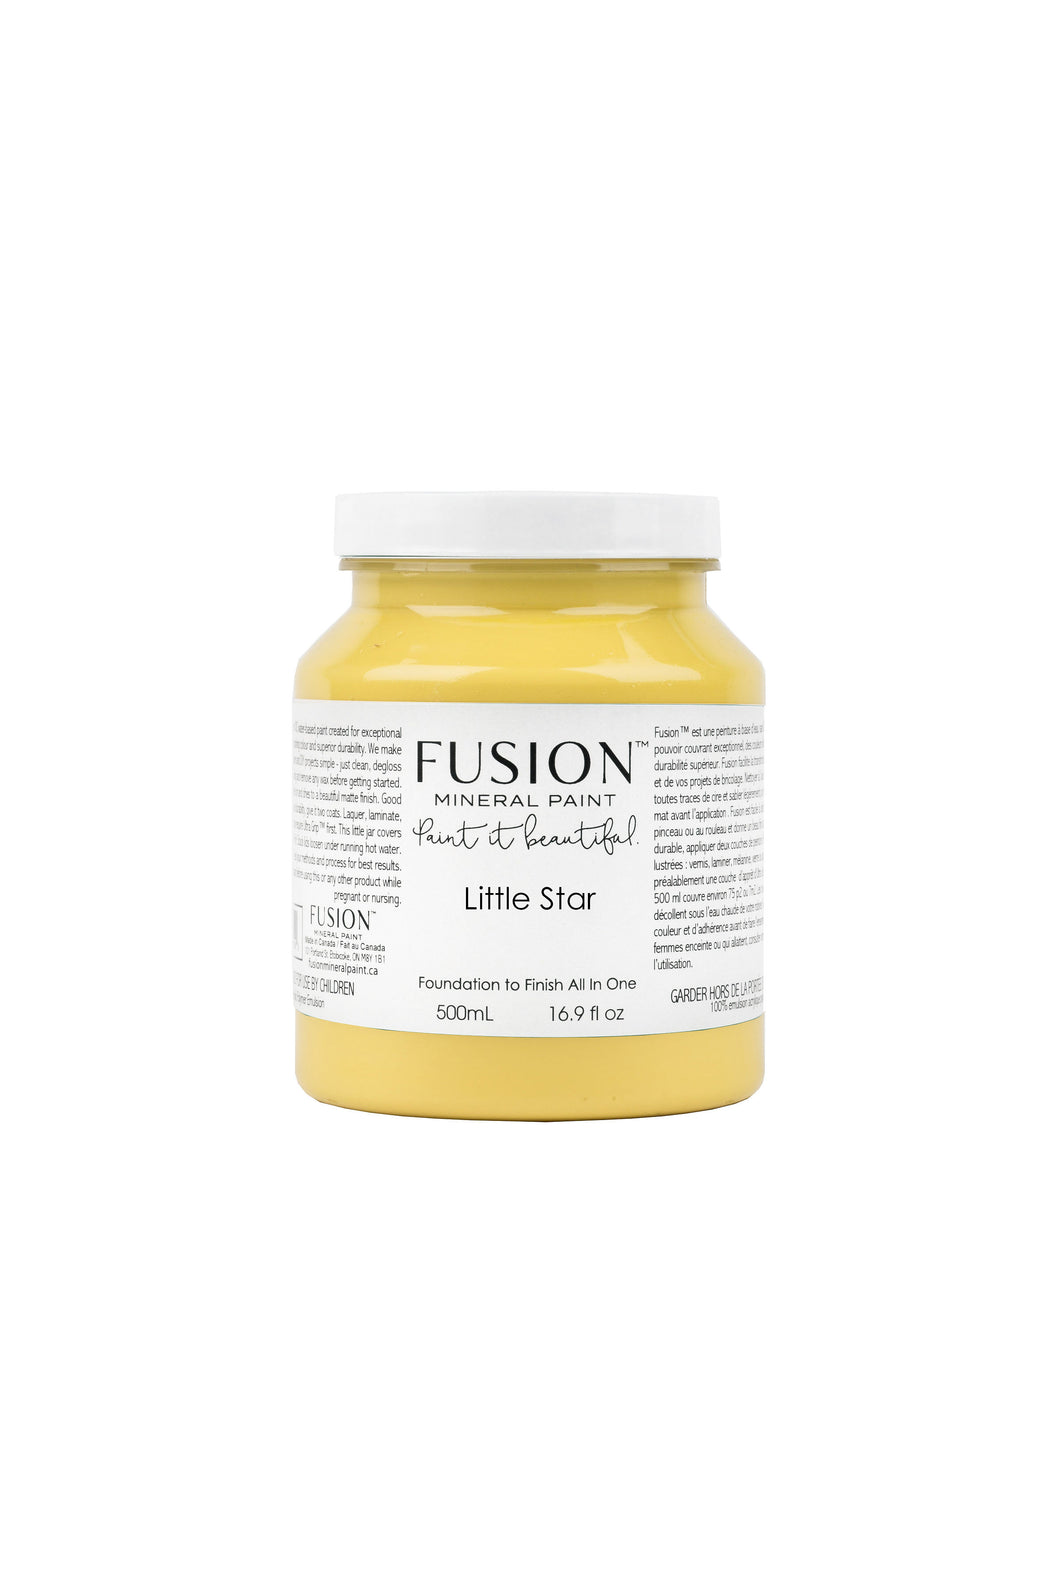 Fusion Mineral Paint Little Star